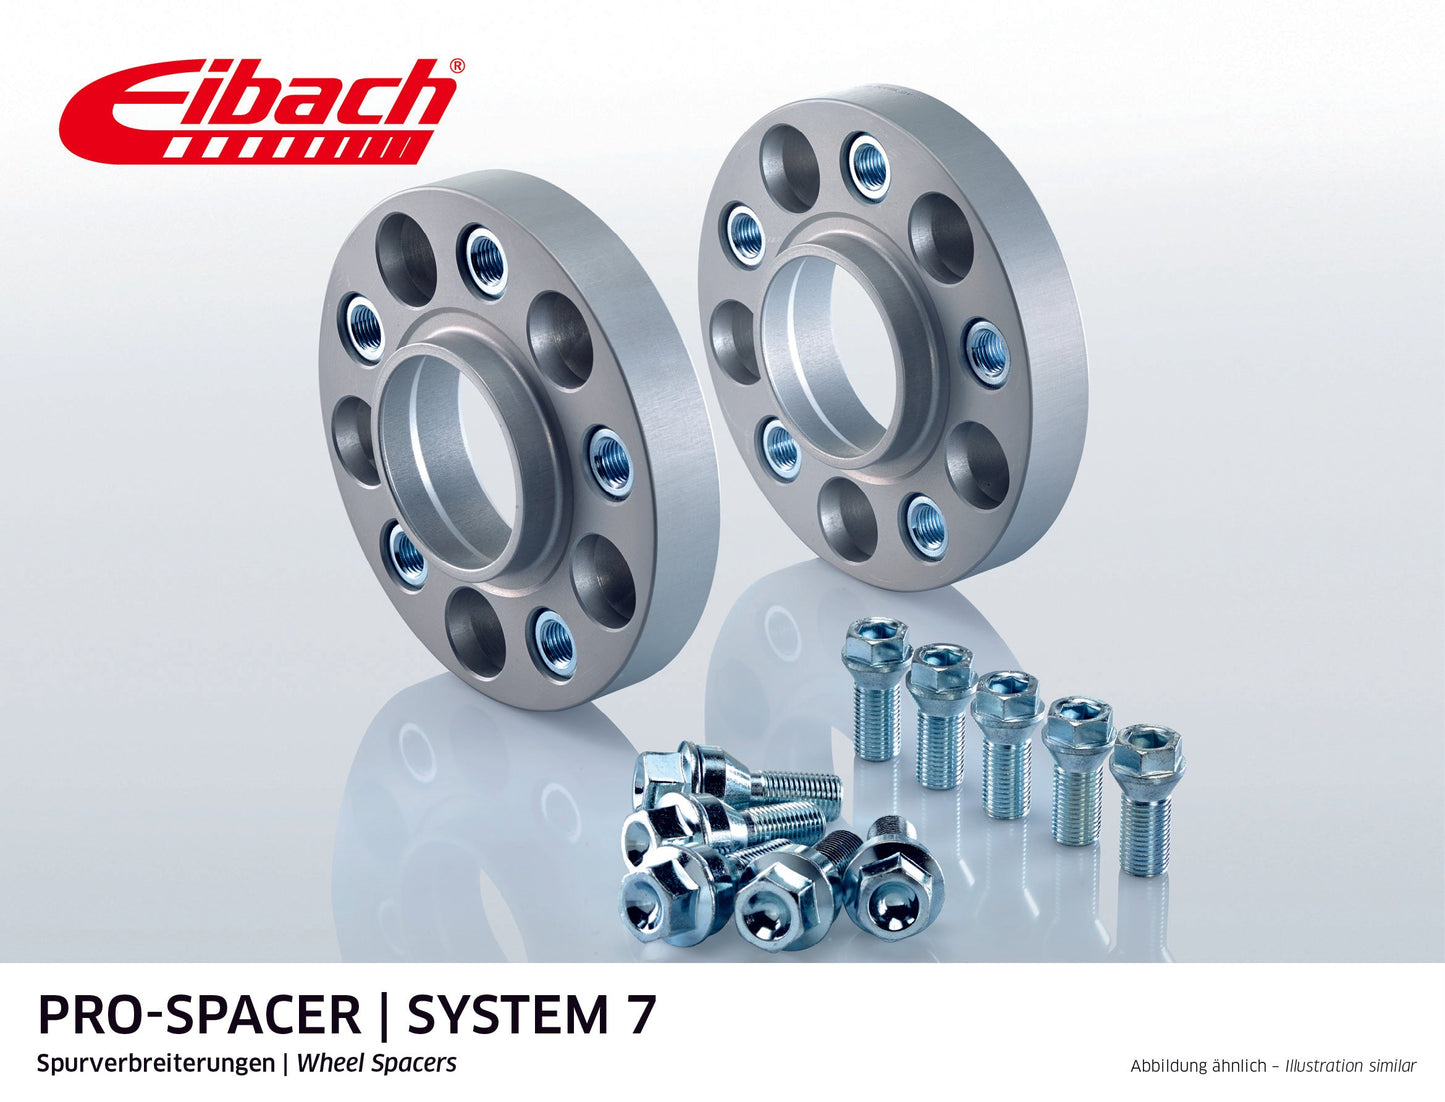 Eibach Pro-Spacer Kit (Pair Of Spacers) 30mm Per Spacer (System 7) S90-7-30-005 (Silver) at £175.85